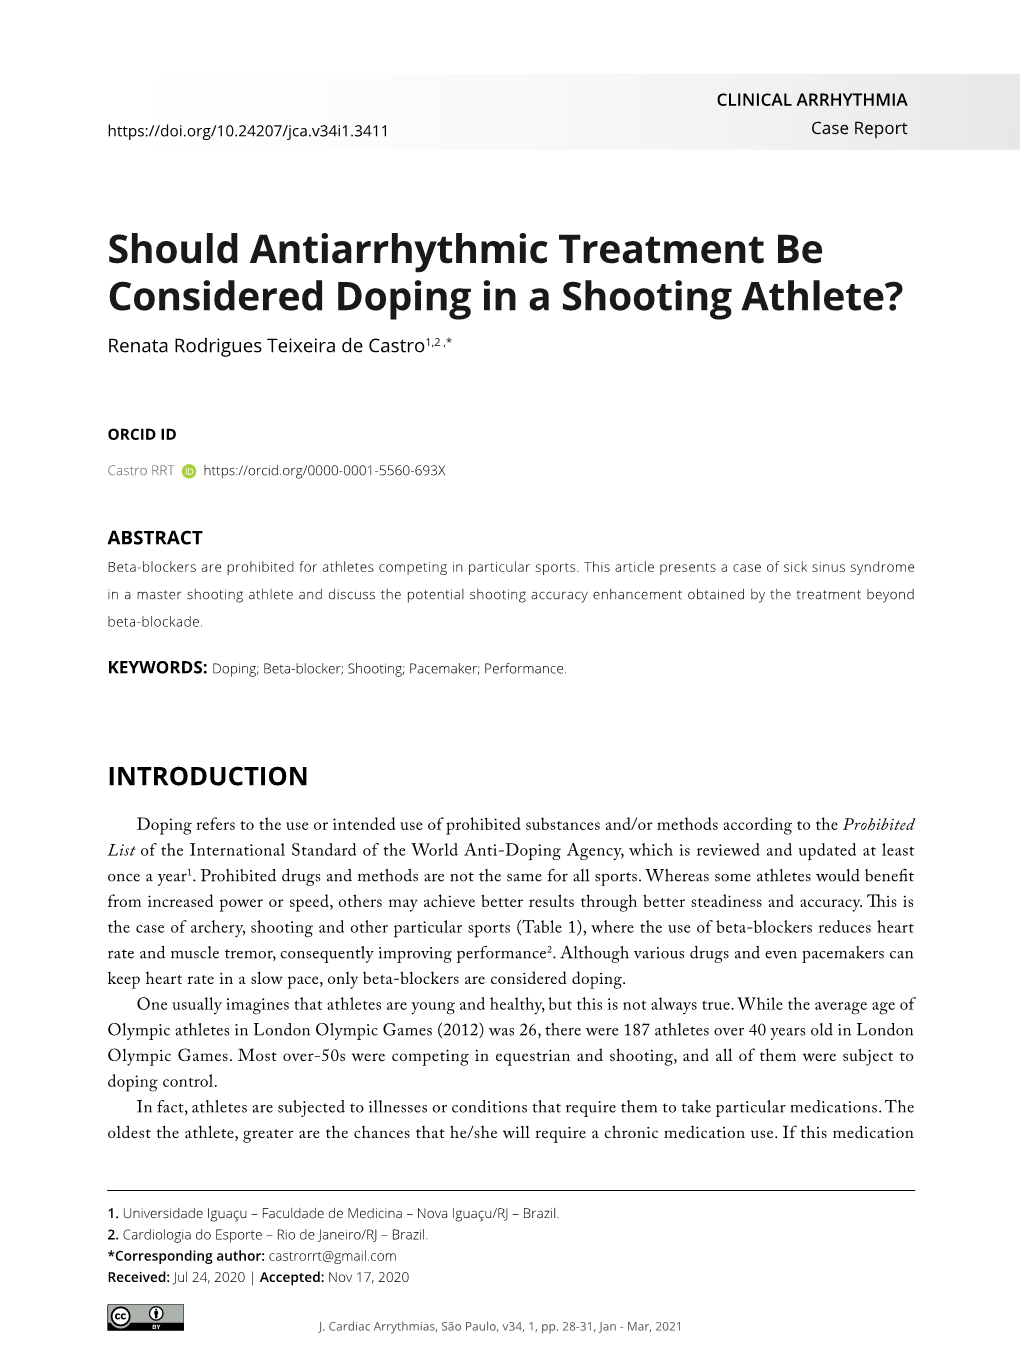 Should Antiarrhythmic Treatment Be Considered Doping in a Shooting Athlete? Renata Rodrigues Teixeira De Castro1,2 ,*